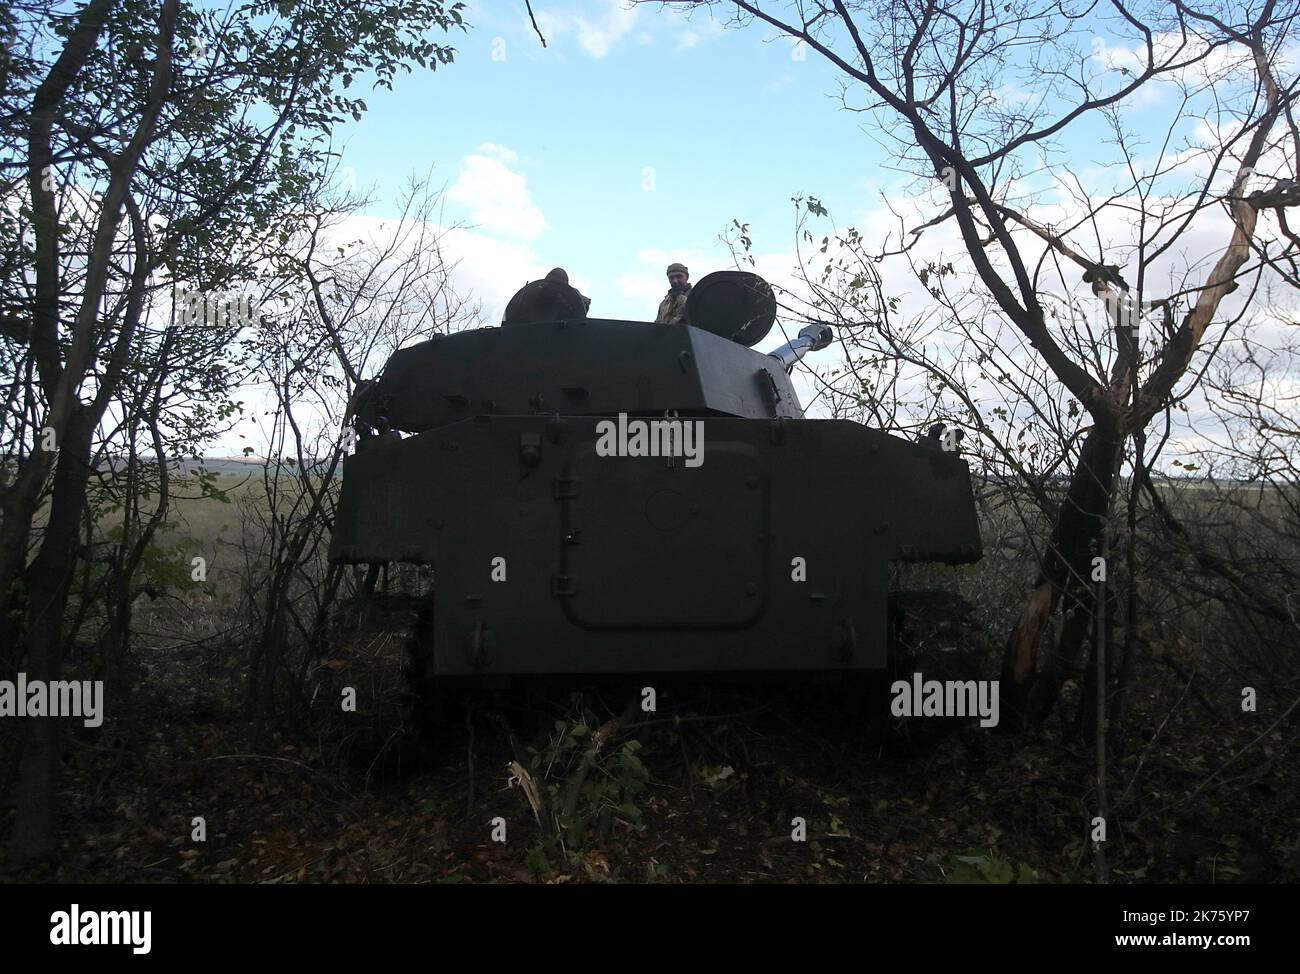 KHARKIV, UKRAINE - OCTOBER 13, 2022 - A self-propelled artillery system 2C1 'Gvozdika' is pictured at the firing position of the artillery of the Armed Forces of Ukraine, Kharkiv Region, northeastern Ukraine. Stock Photo